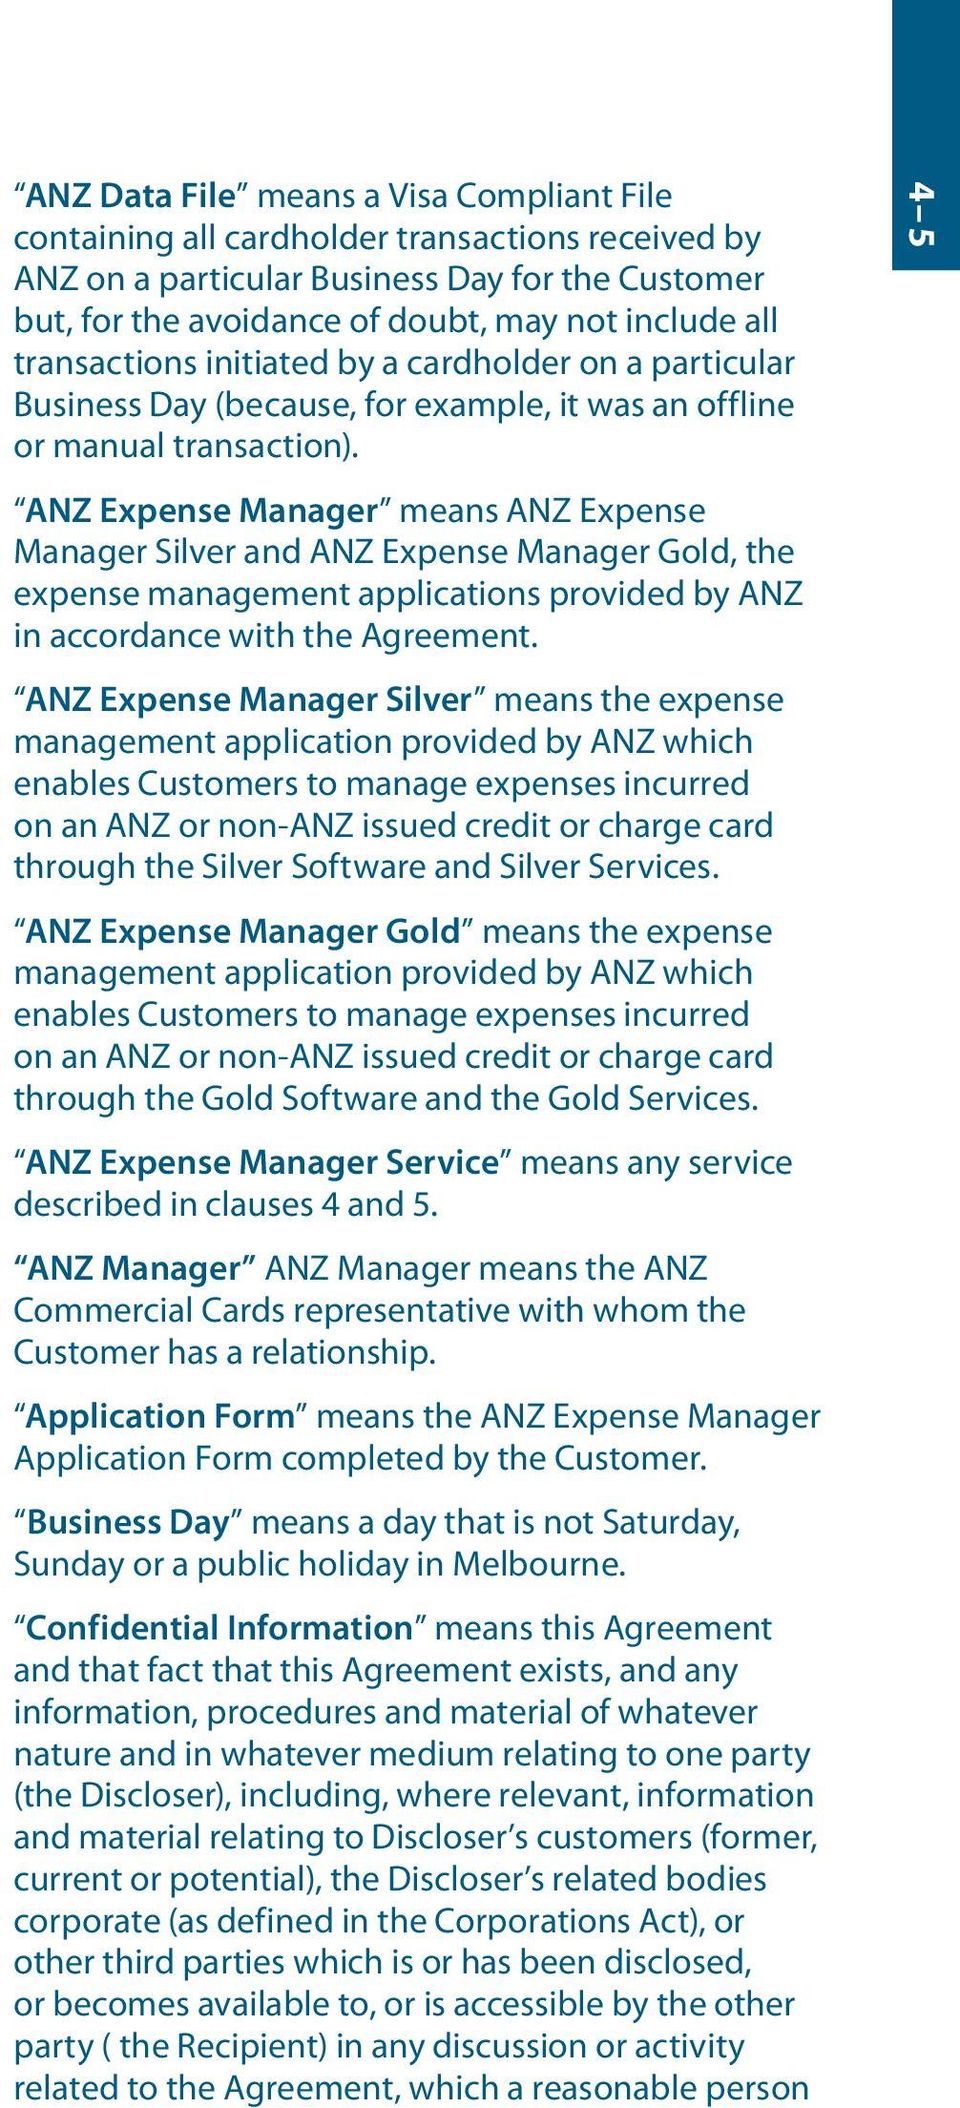 ANZ Expense Manager means ANZ Expense Manager Silver and ANZ Expense Manager Gold, the expense management applications provided by ANZ in accordance with the Agreement.